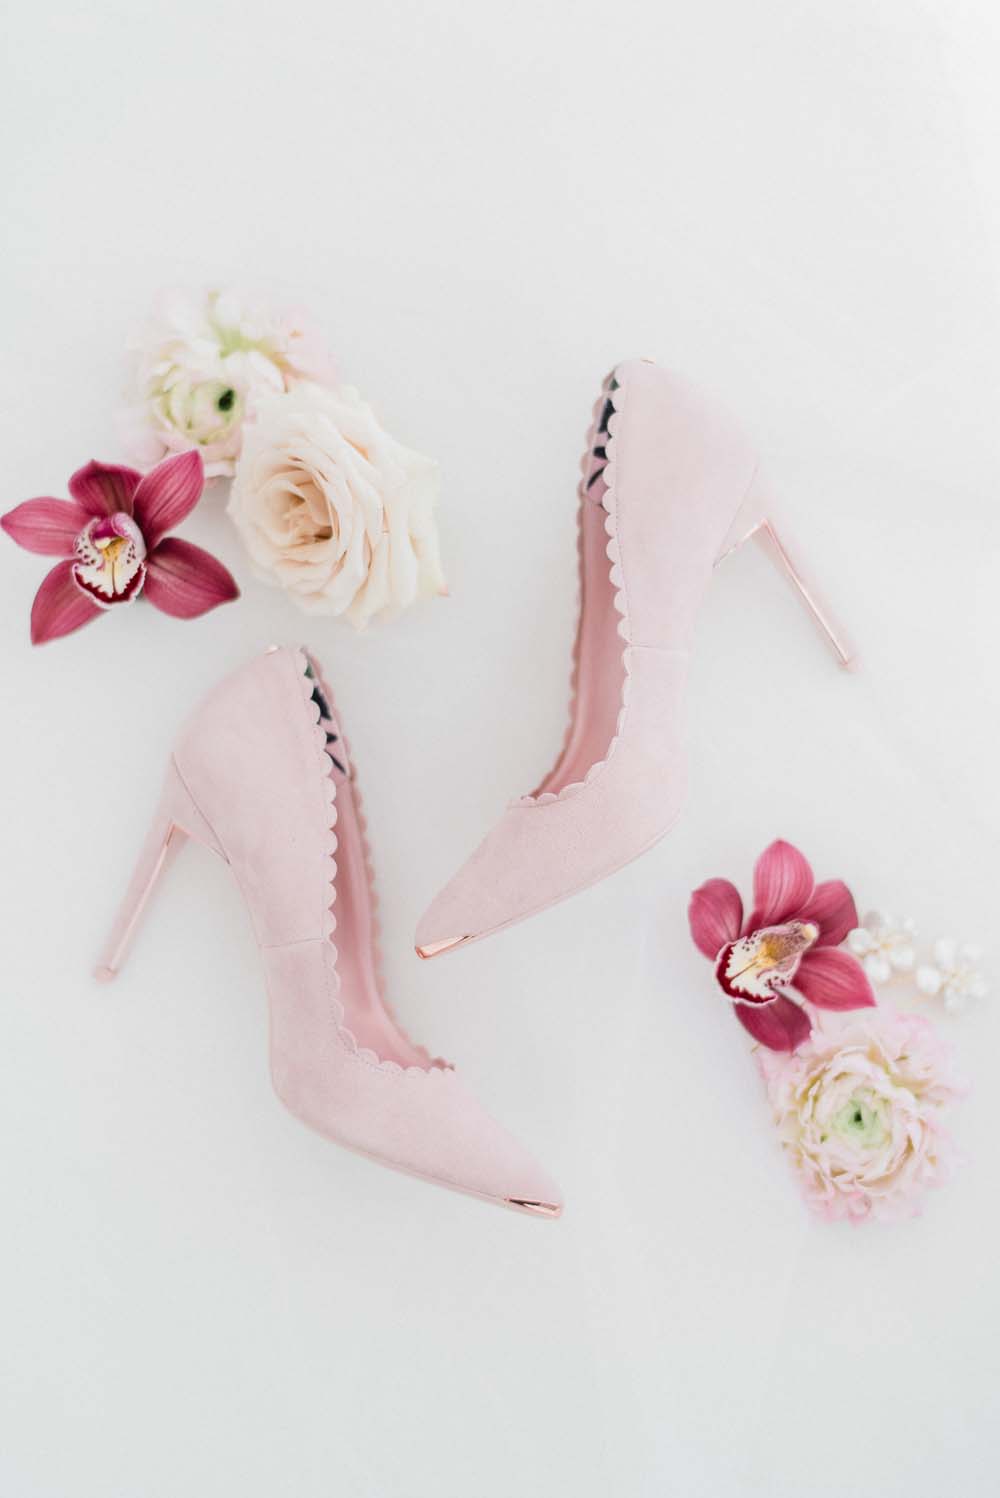 A Colourful Pink & Mauve Styled Shoot At The Art Gallery of Hamilton - Shoes